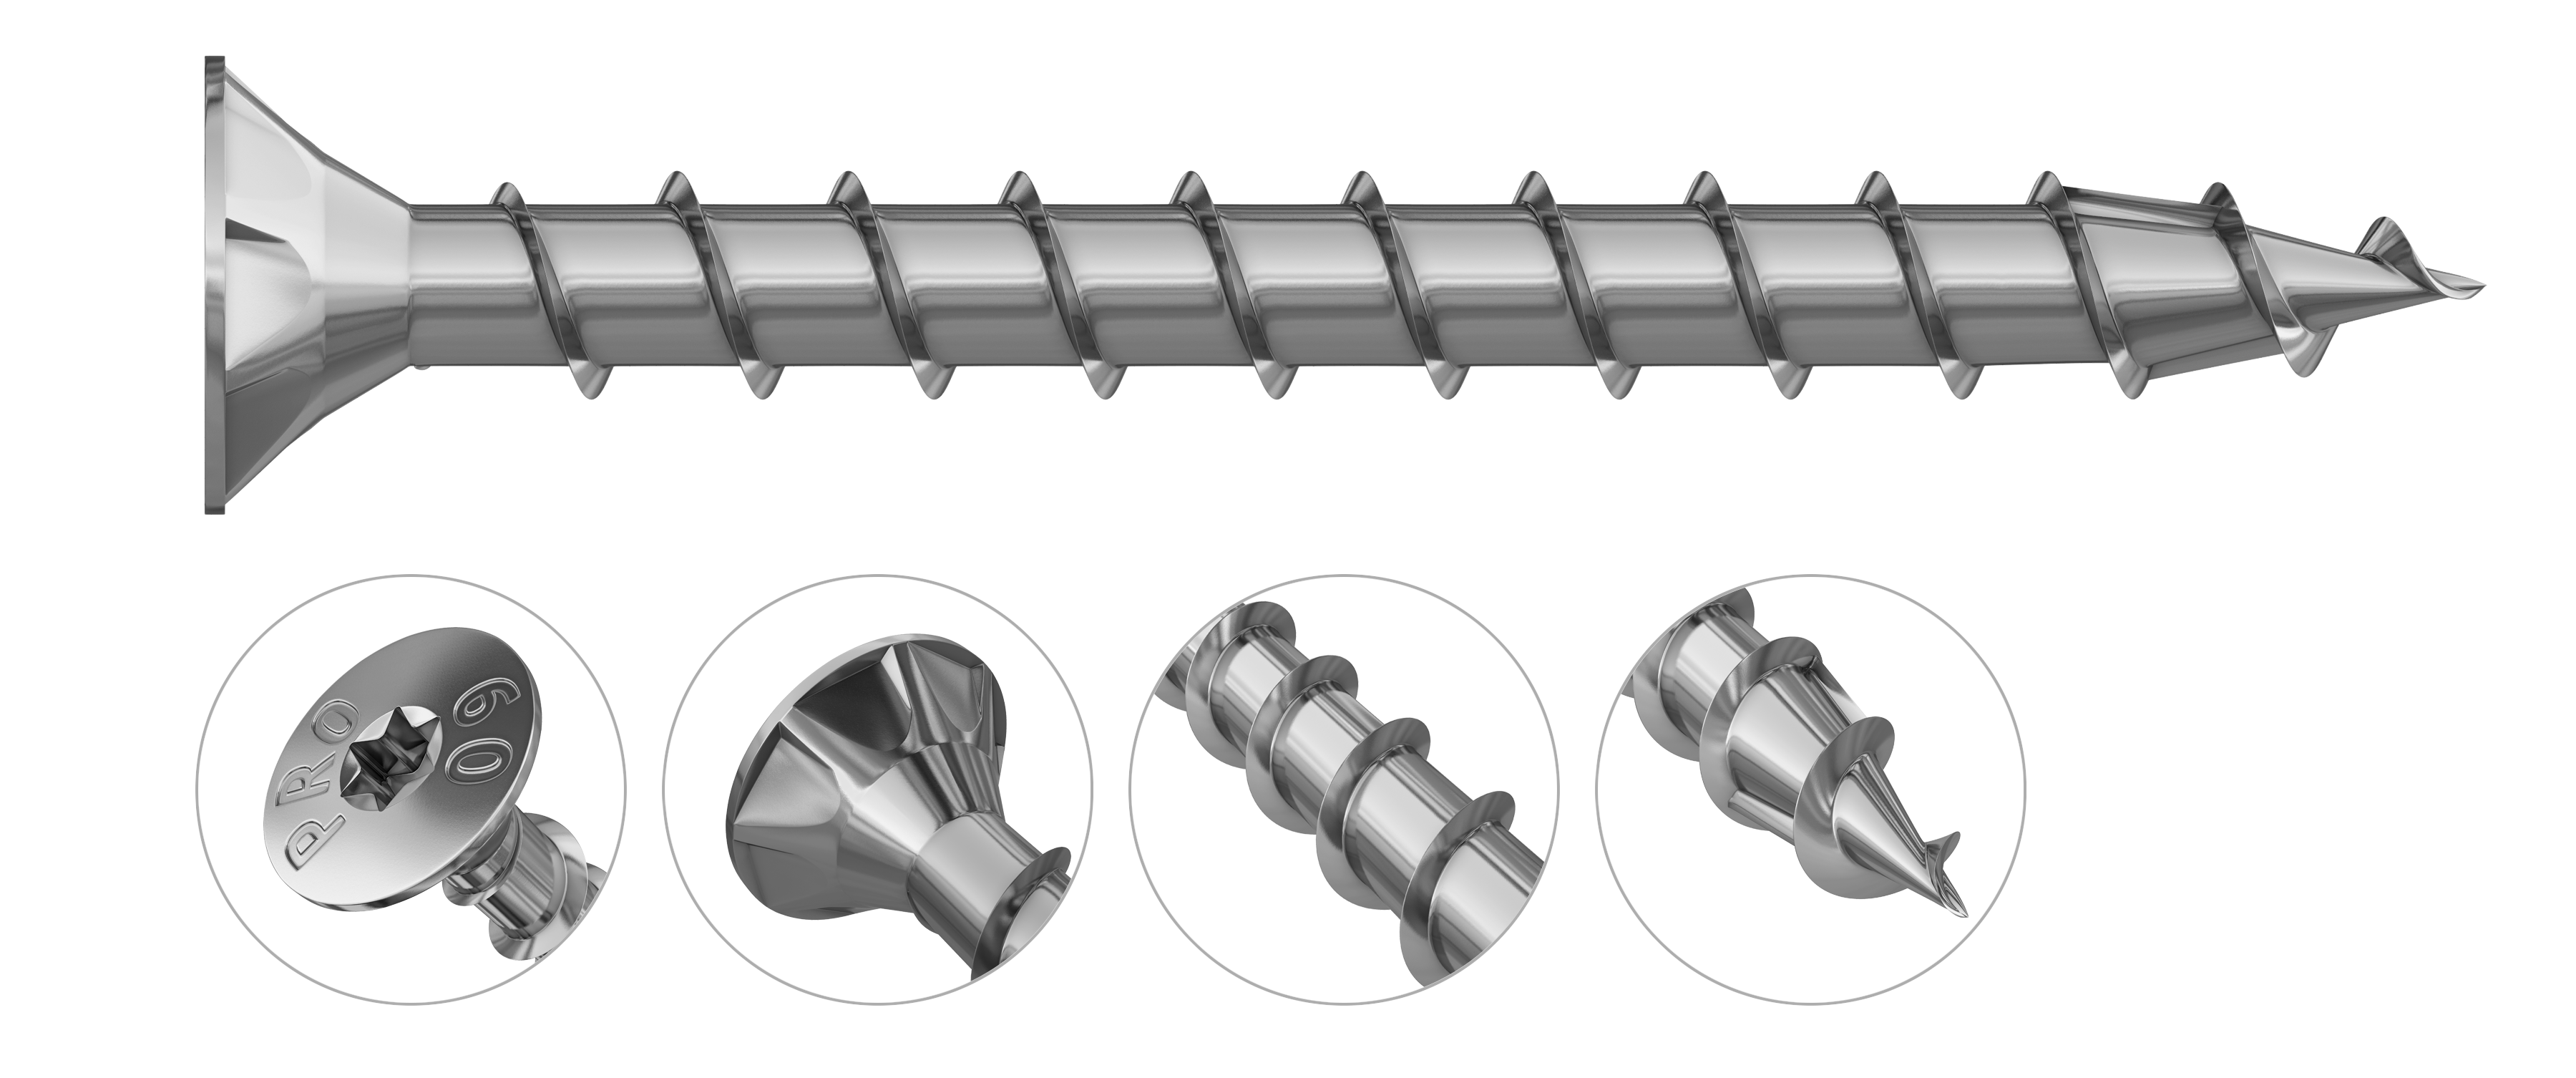 R-PVS Construction screw with countersunk head and full thread